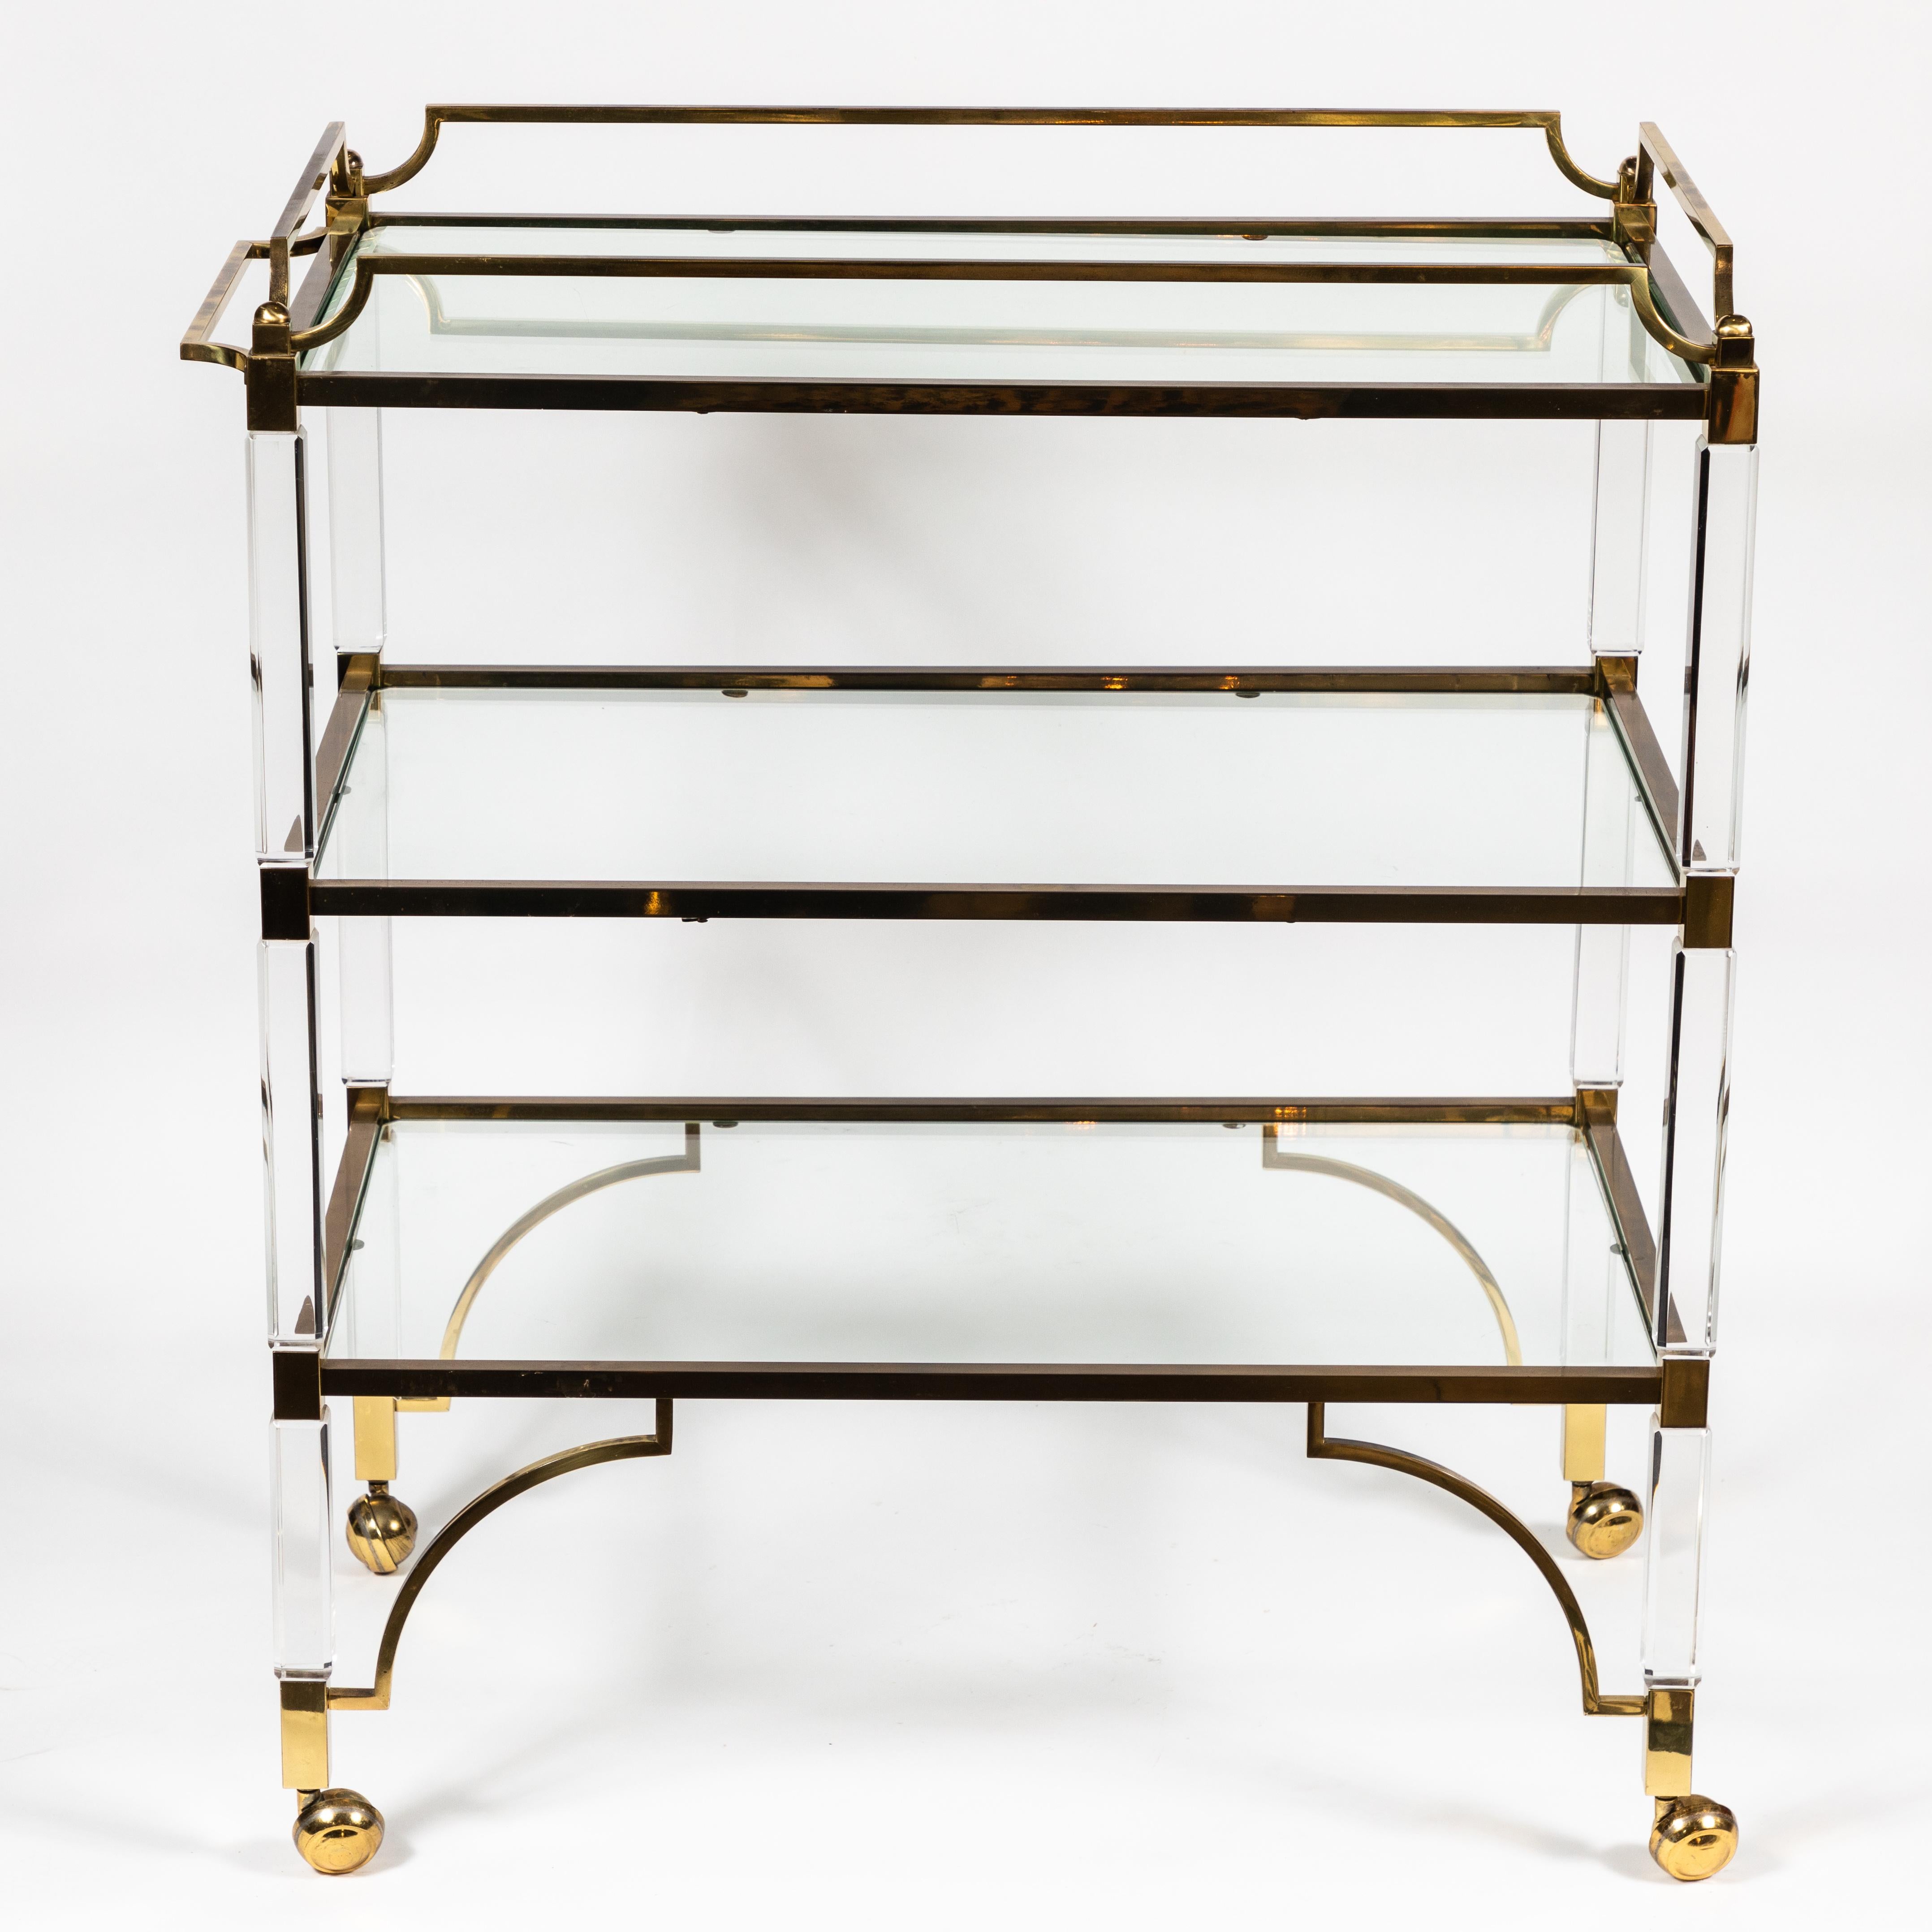 Chic, yet functional bar cart in Lucite with brass frame and detail. Glass shelves. Excellent vintage condition.